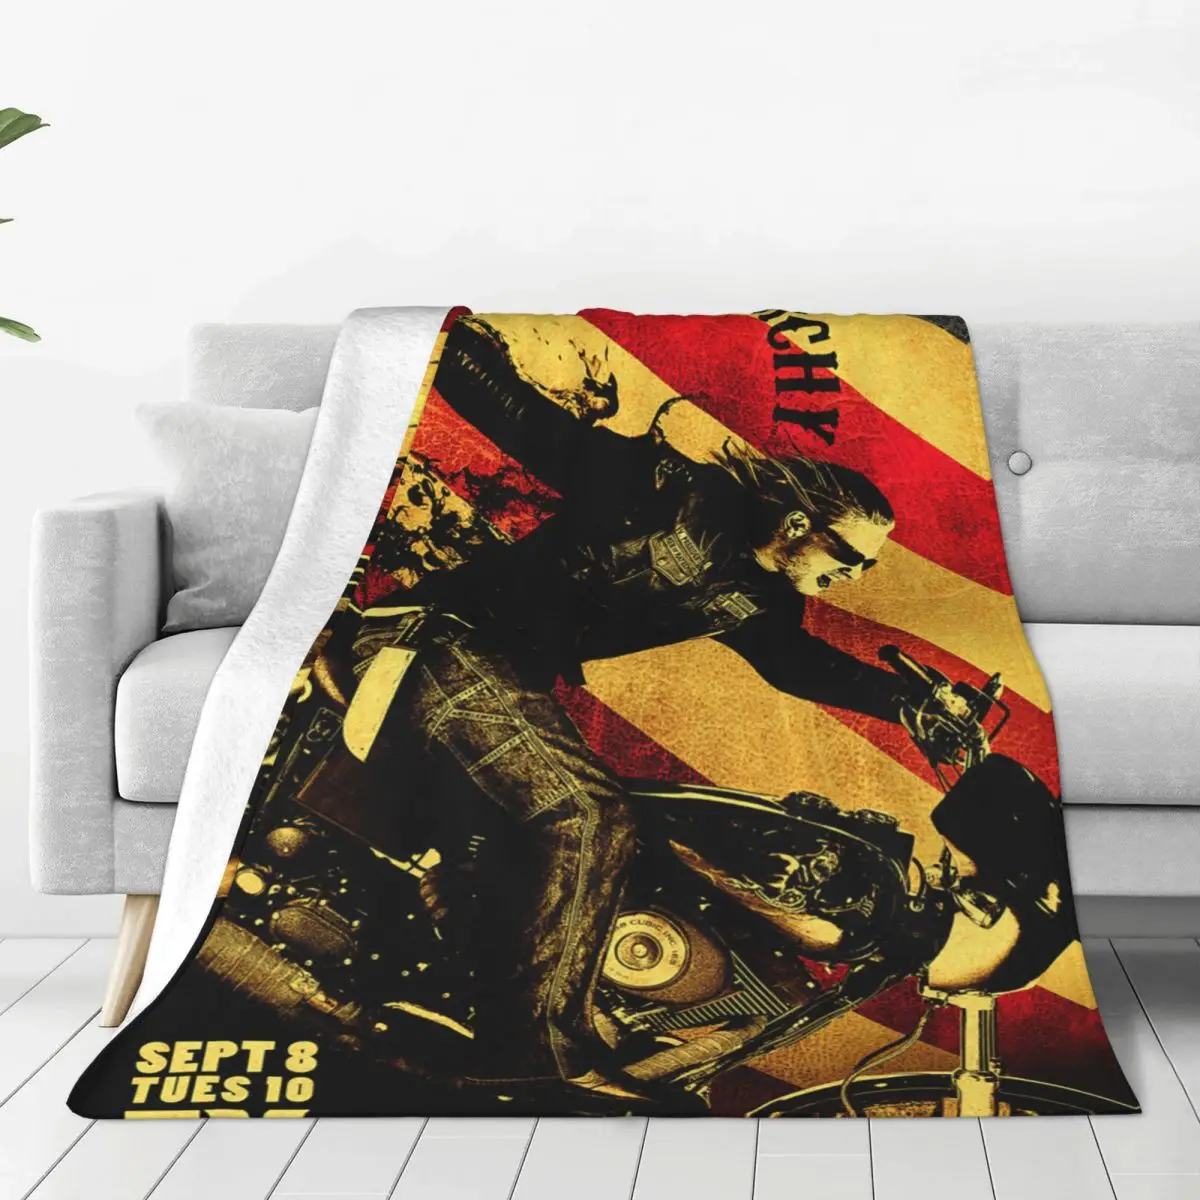 

Sons Of Anarchy Jax Teller Crime Flannel Blanket the Death Motorcycle Throw Blanket for Home Hotel Sofa 125*100cm Rug Piece